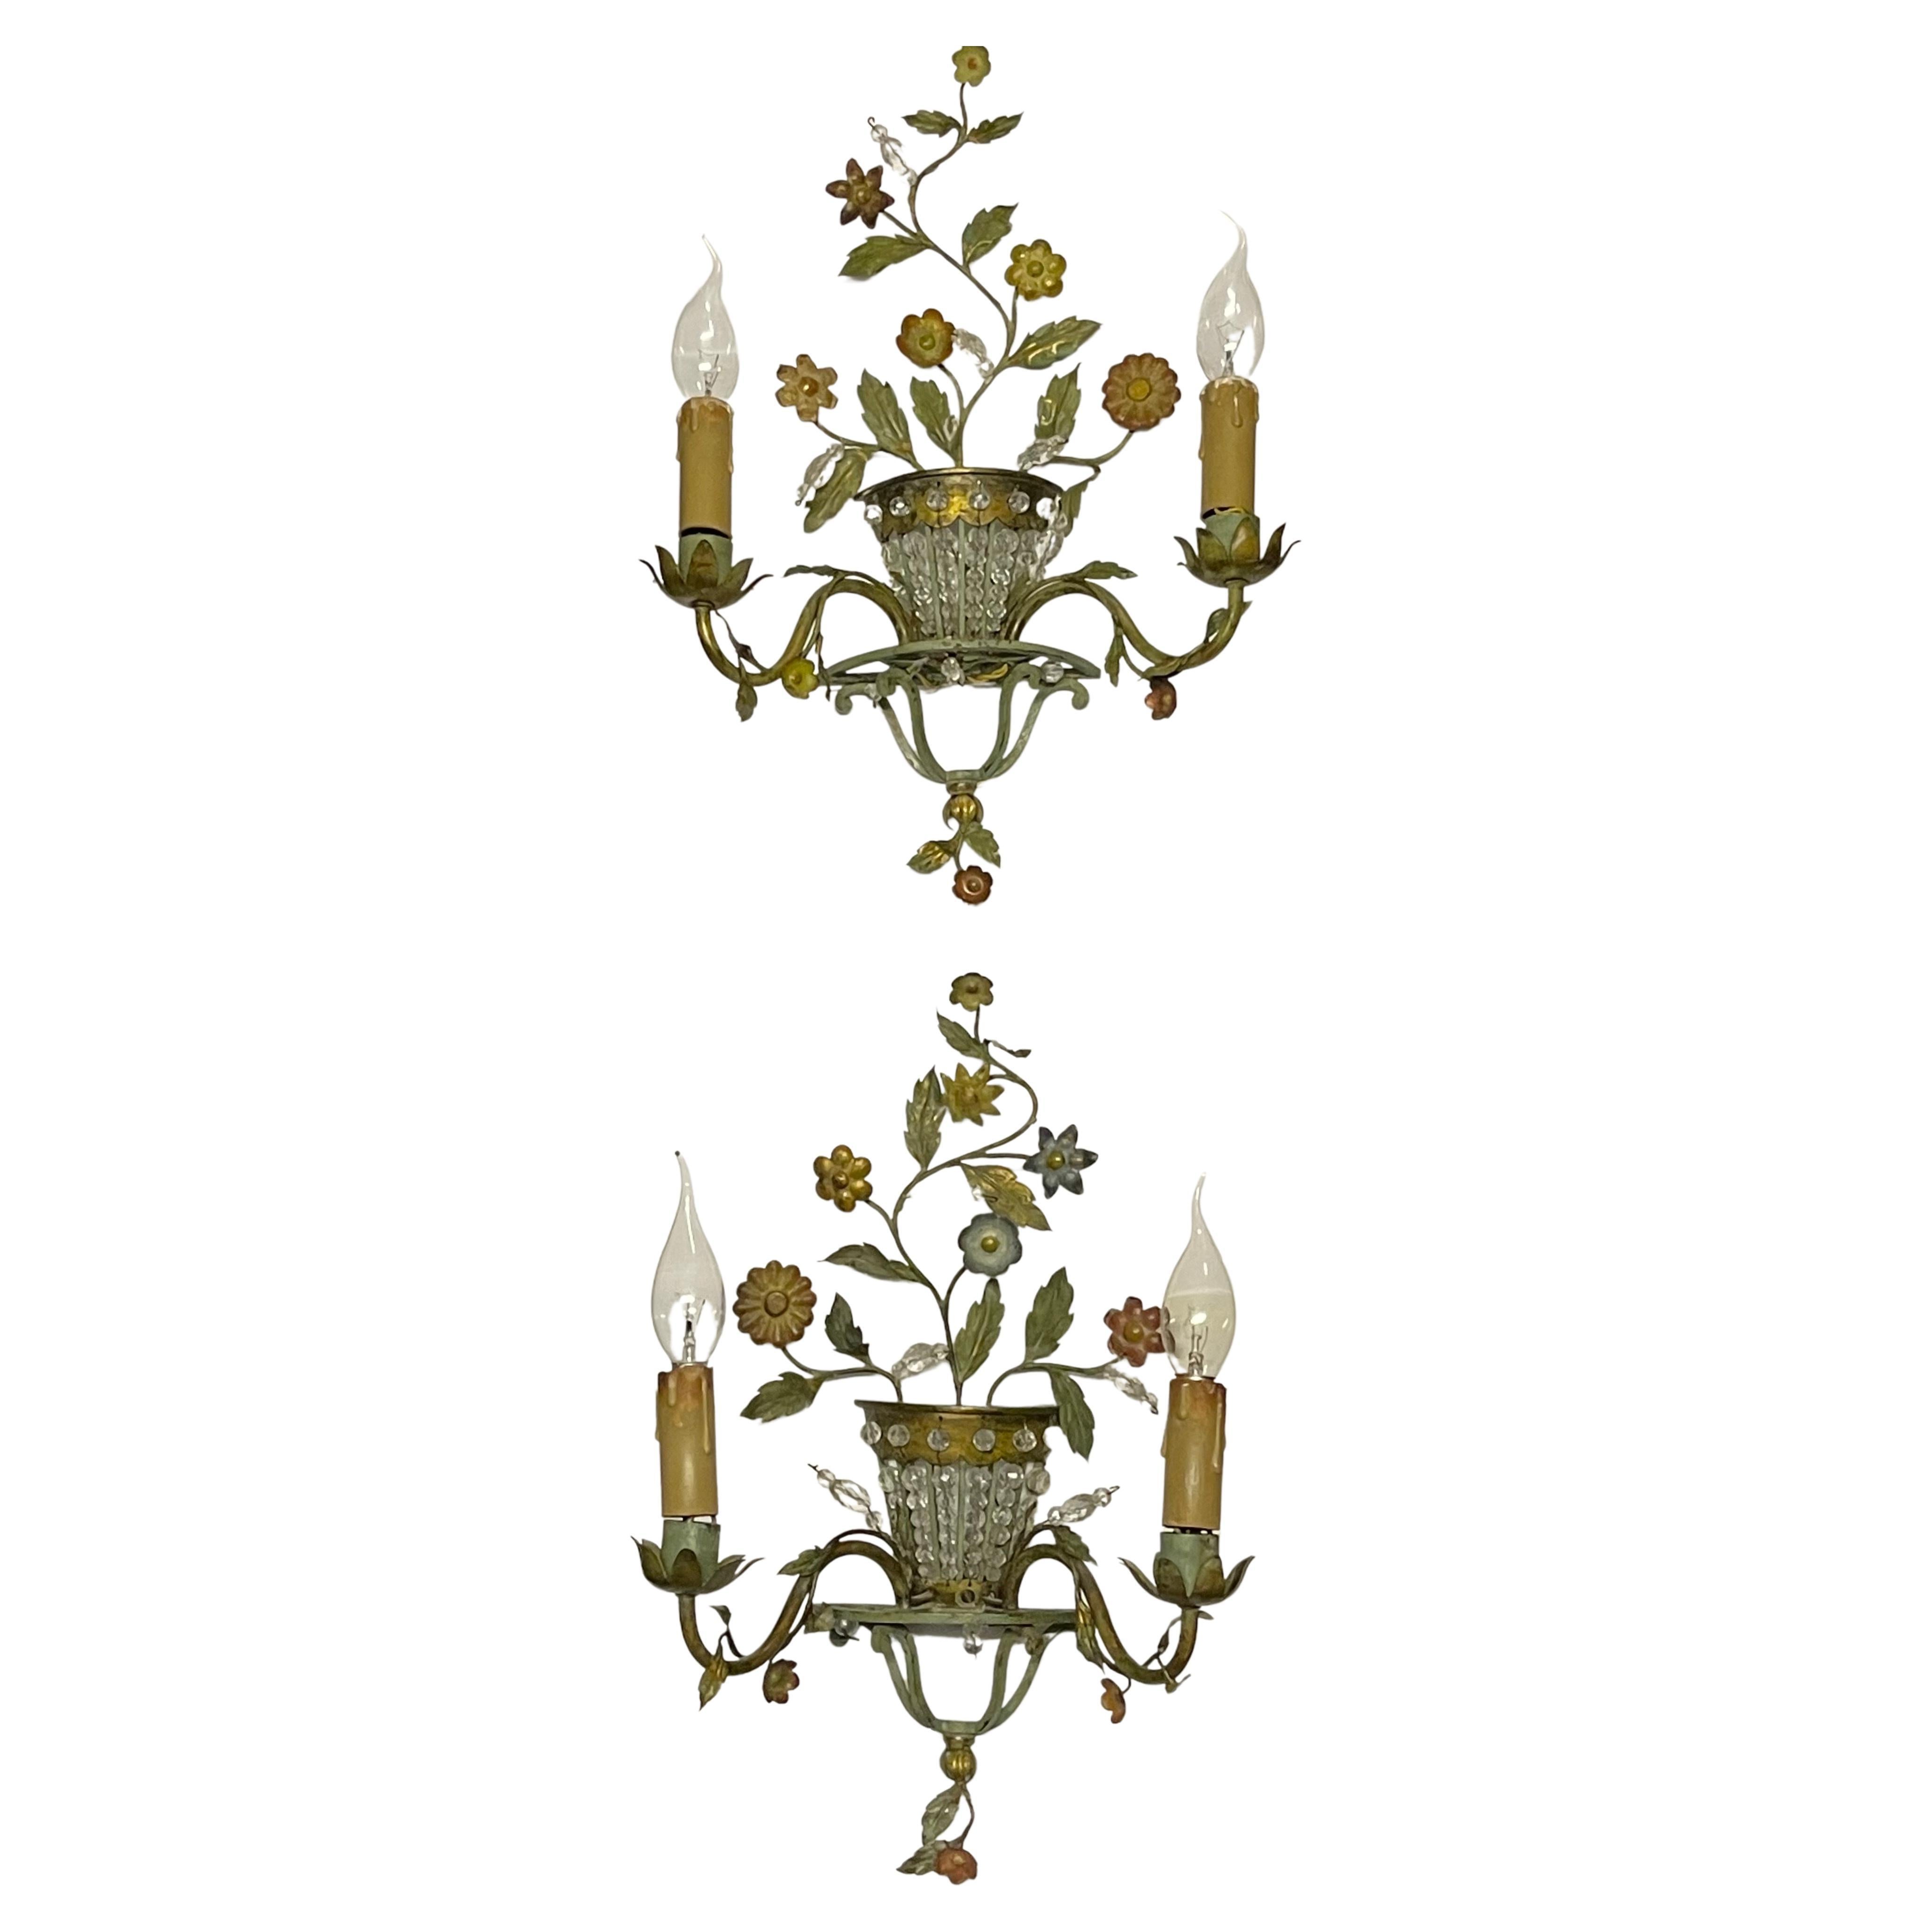 Pair of French Patinated Bronze Flower and Leaves Wall Sconces, circa 1920s For Sale 6